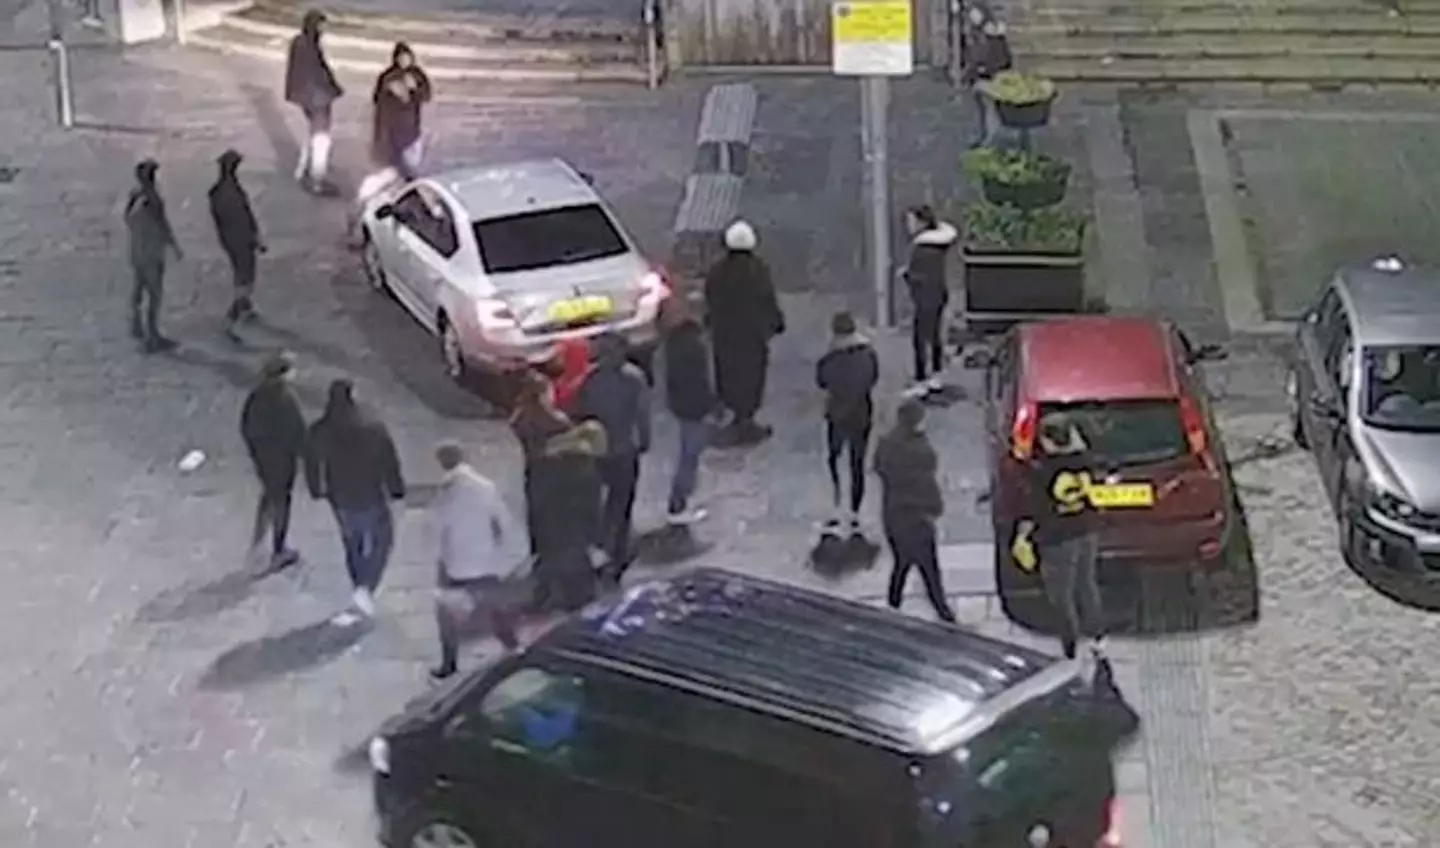 The fight was captured on CCTV.